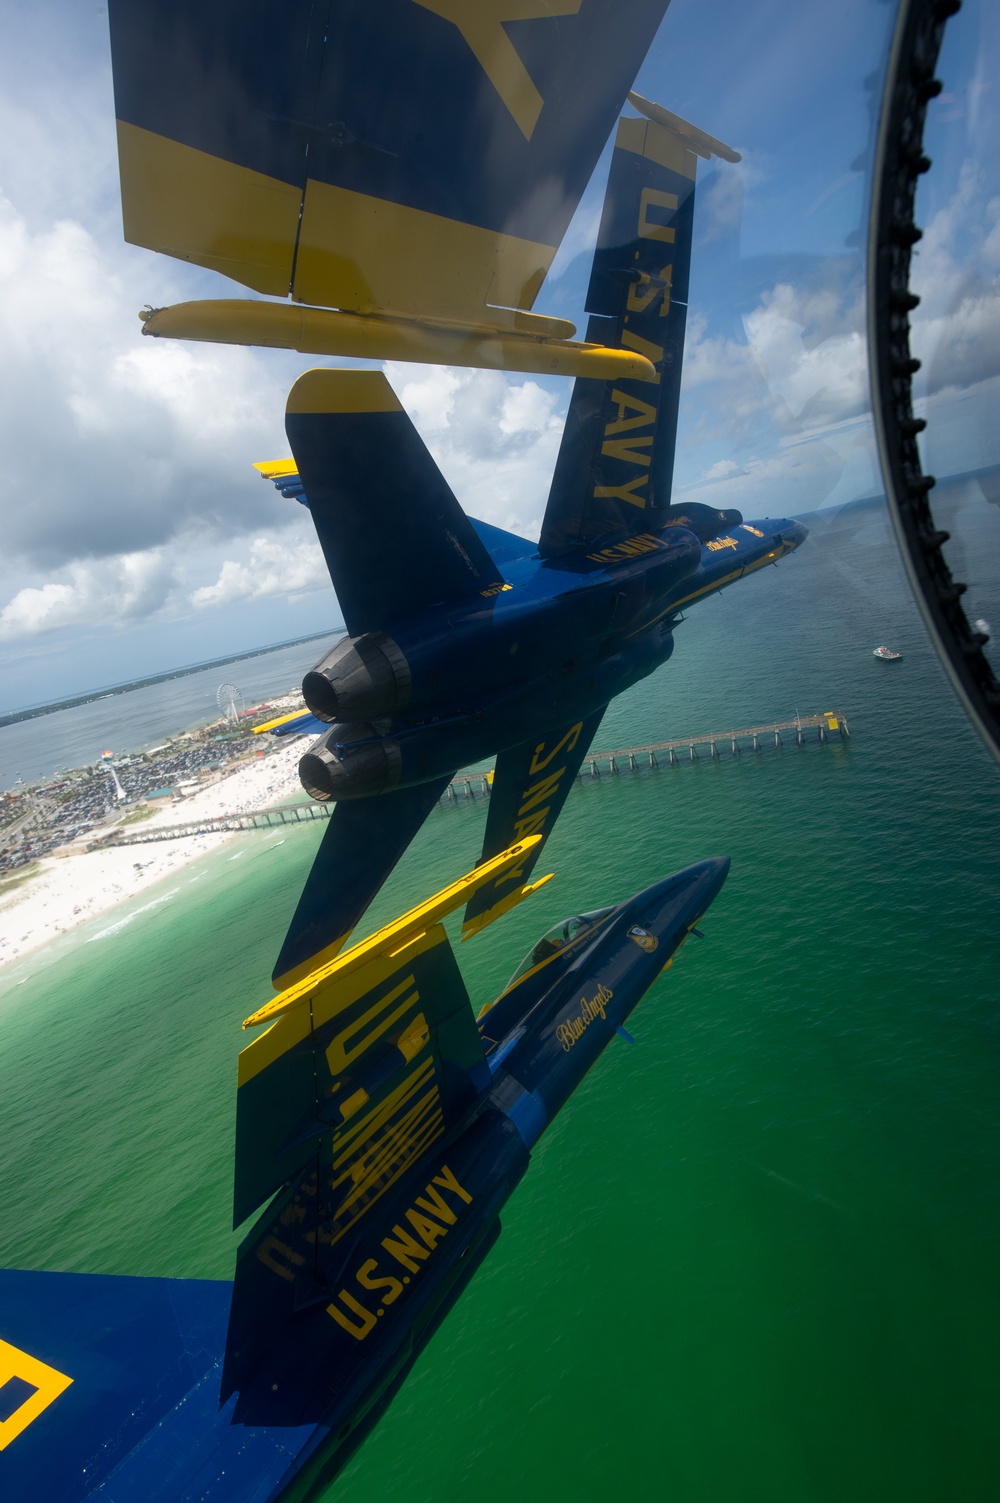 The Blue Angels practice in Florida